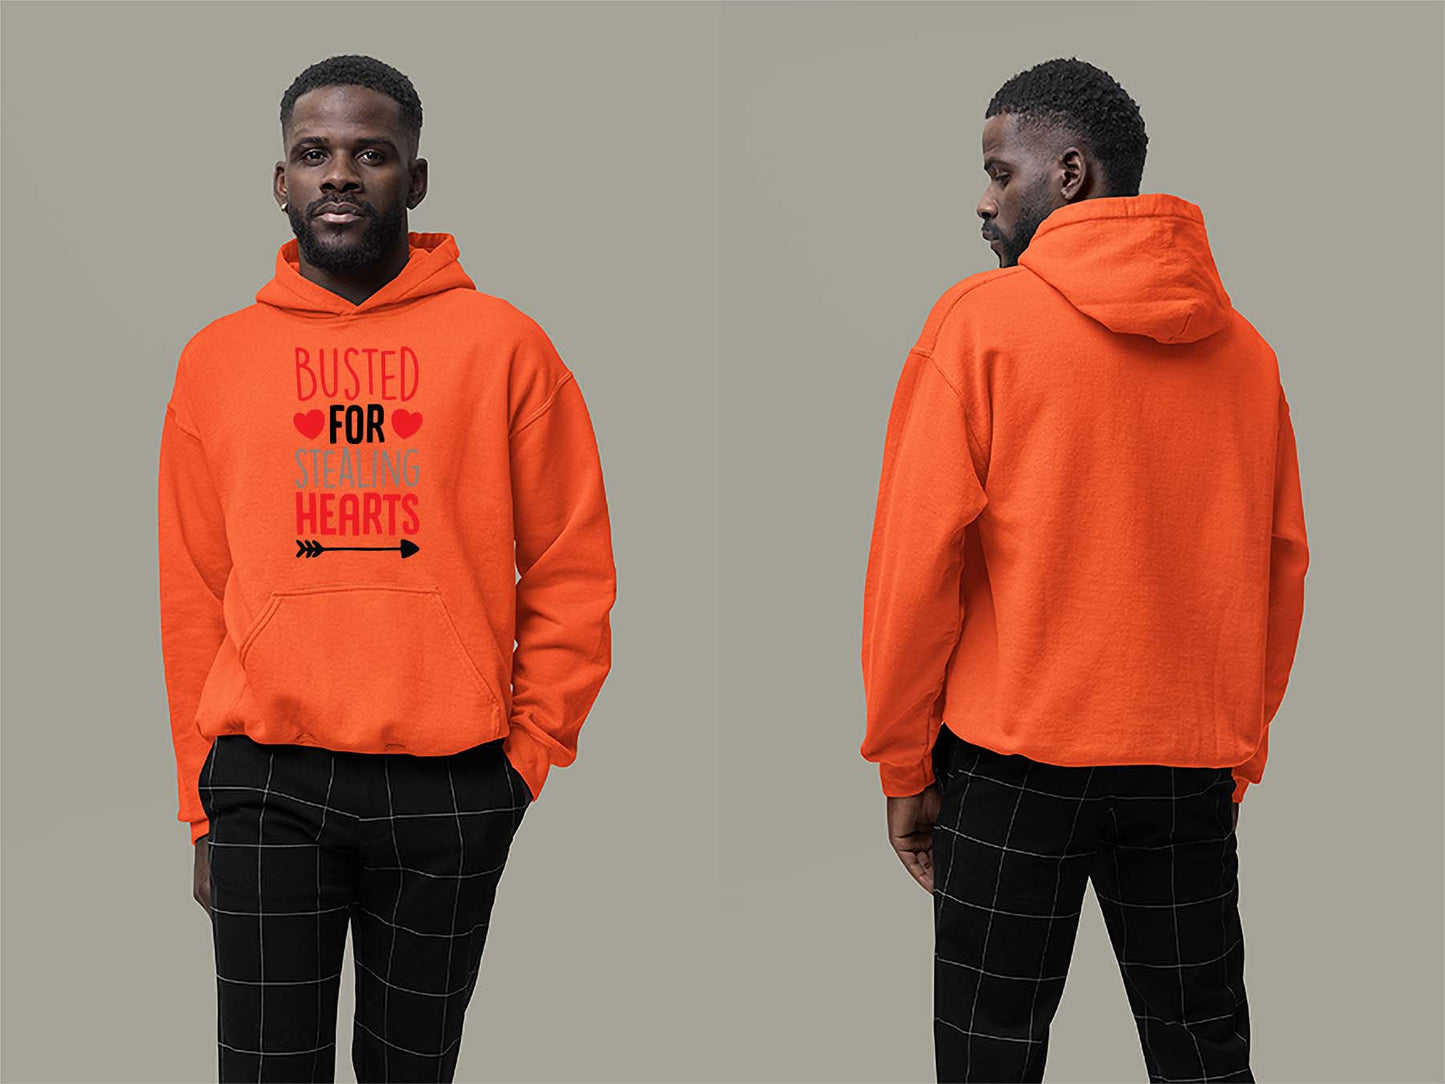 Fat Dave Busted For Stealing Hearts Hoodie Small Orange